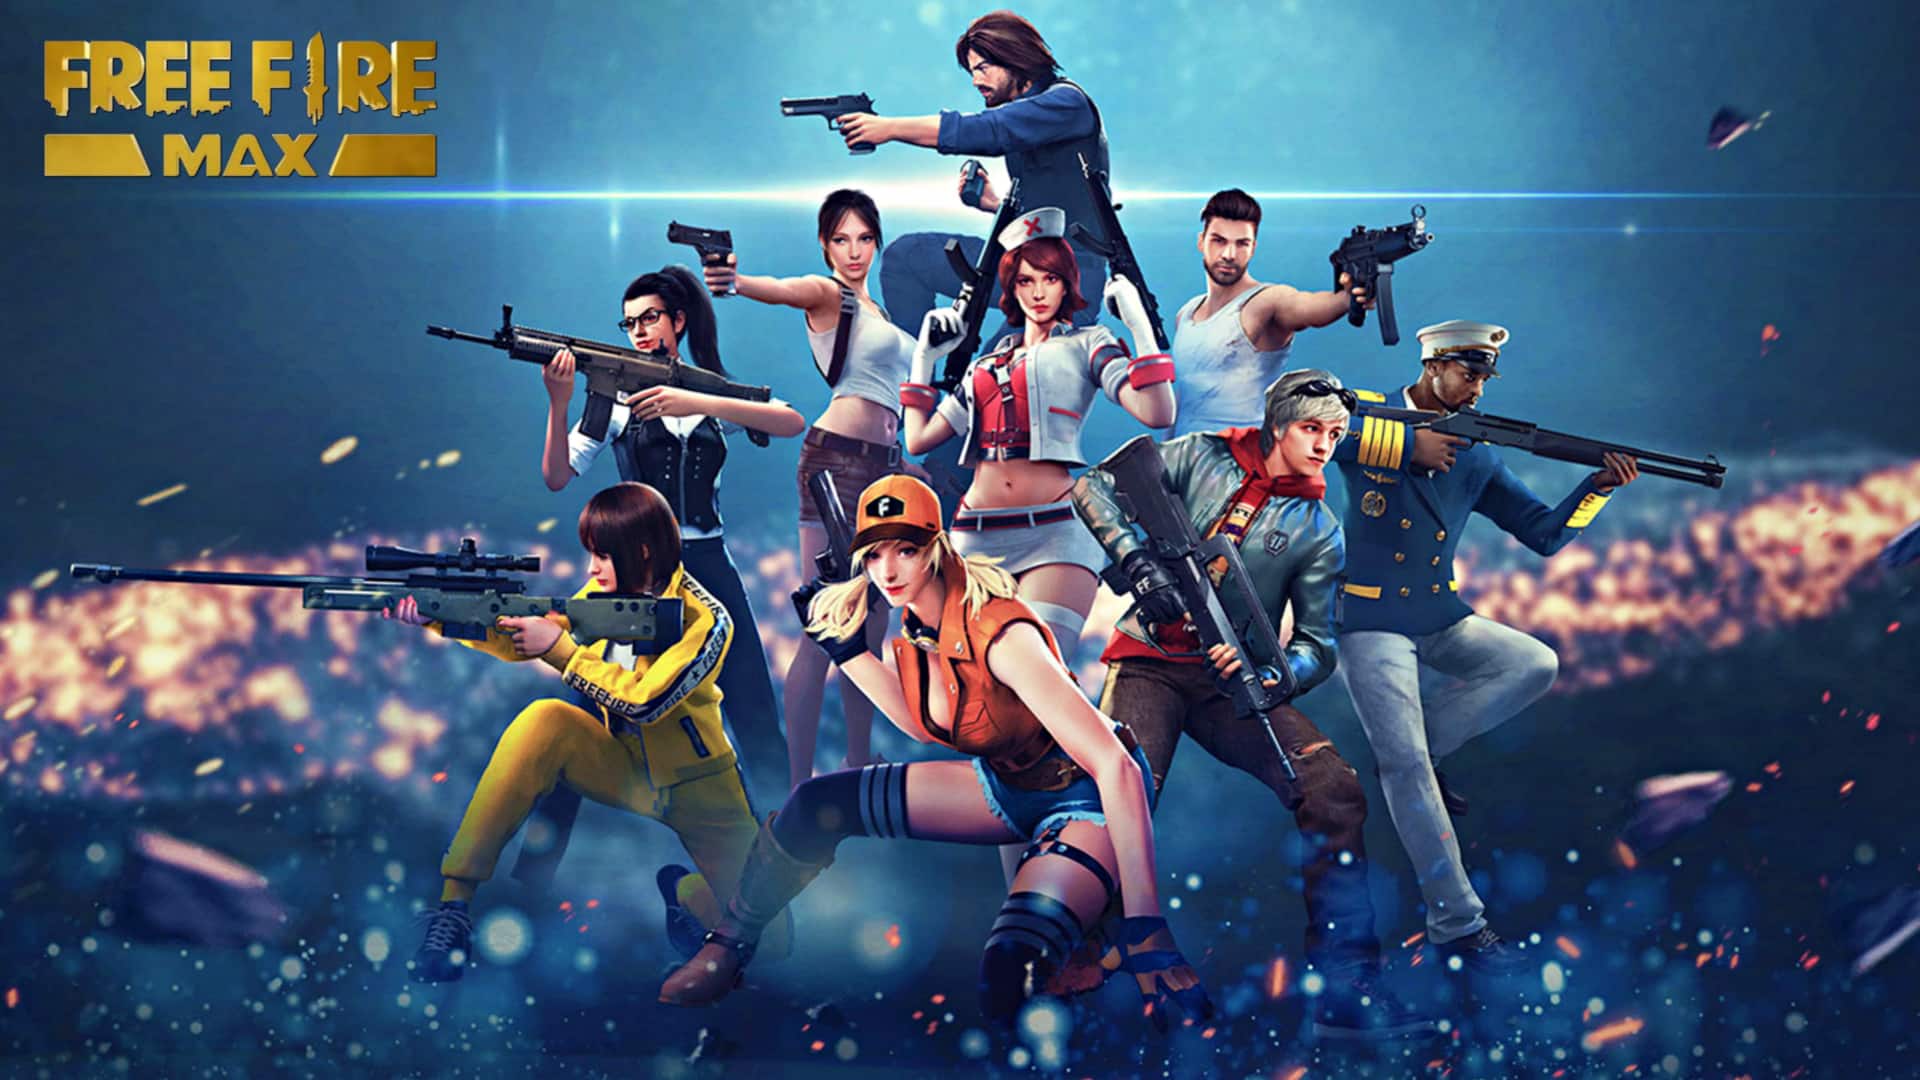 Free Fire MAX codes for March 9: How to redeem